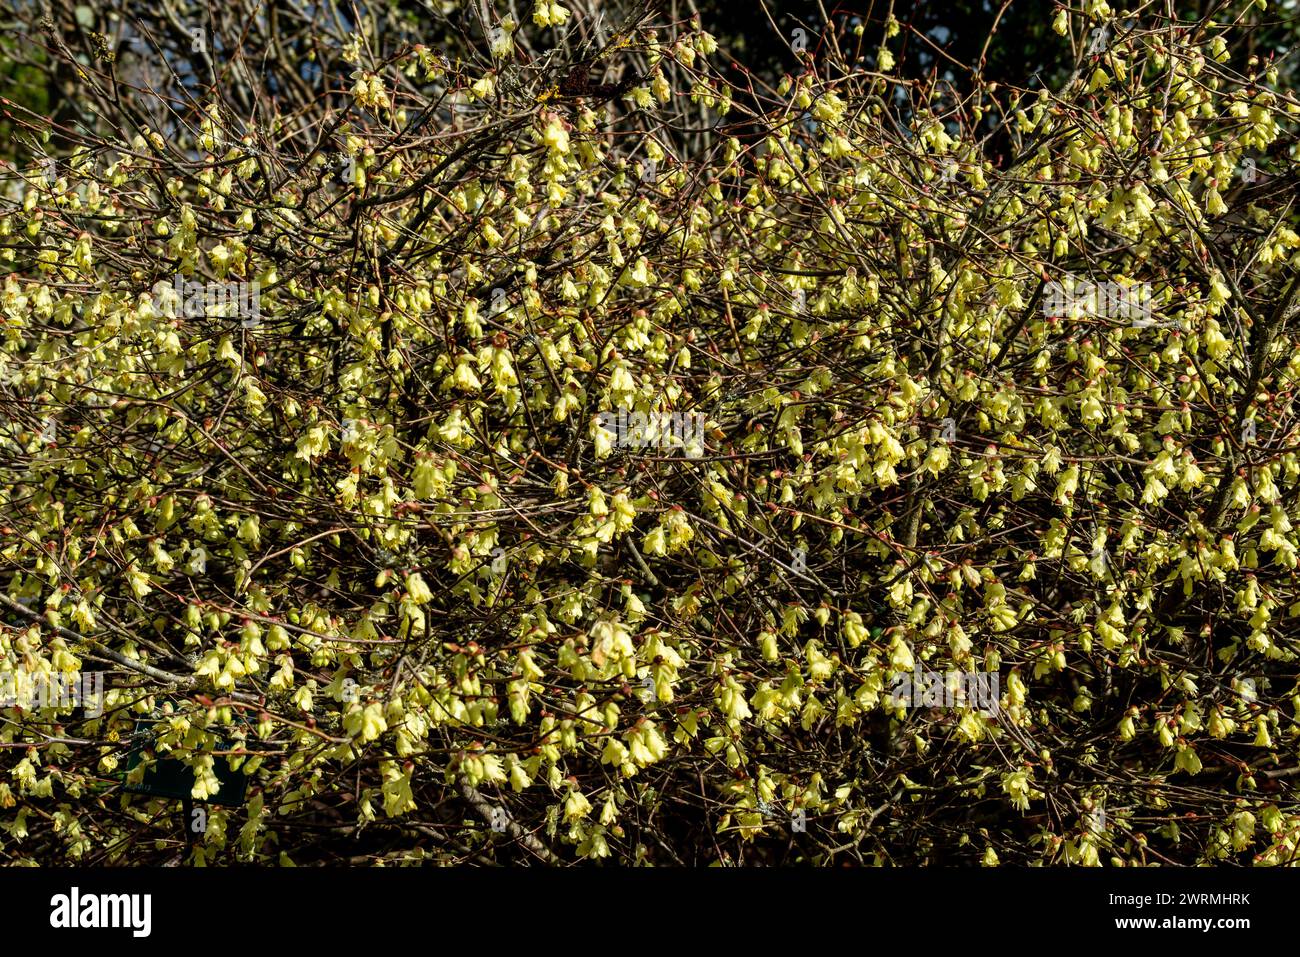 Corylopsis pauciflora an early spring flowering shrub plant with a primrose yellow springtime flower commonly known as winter hazel, stock photo image Stock Photo